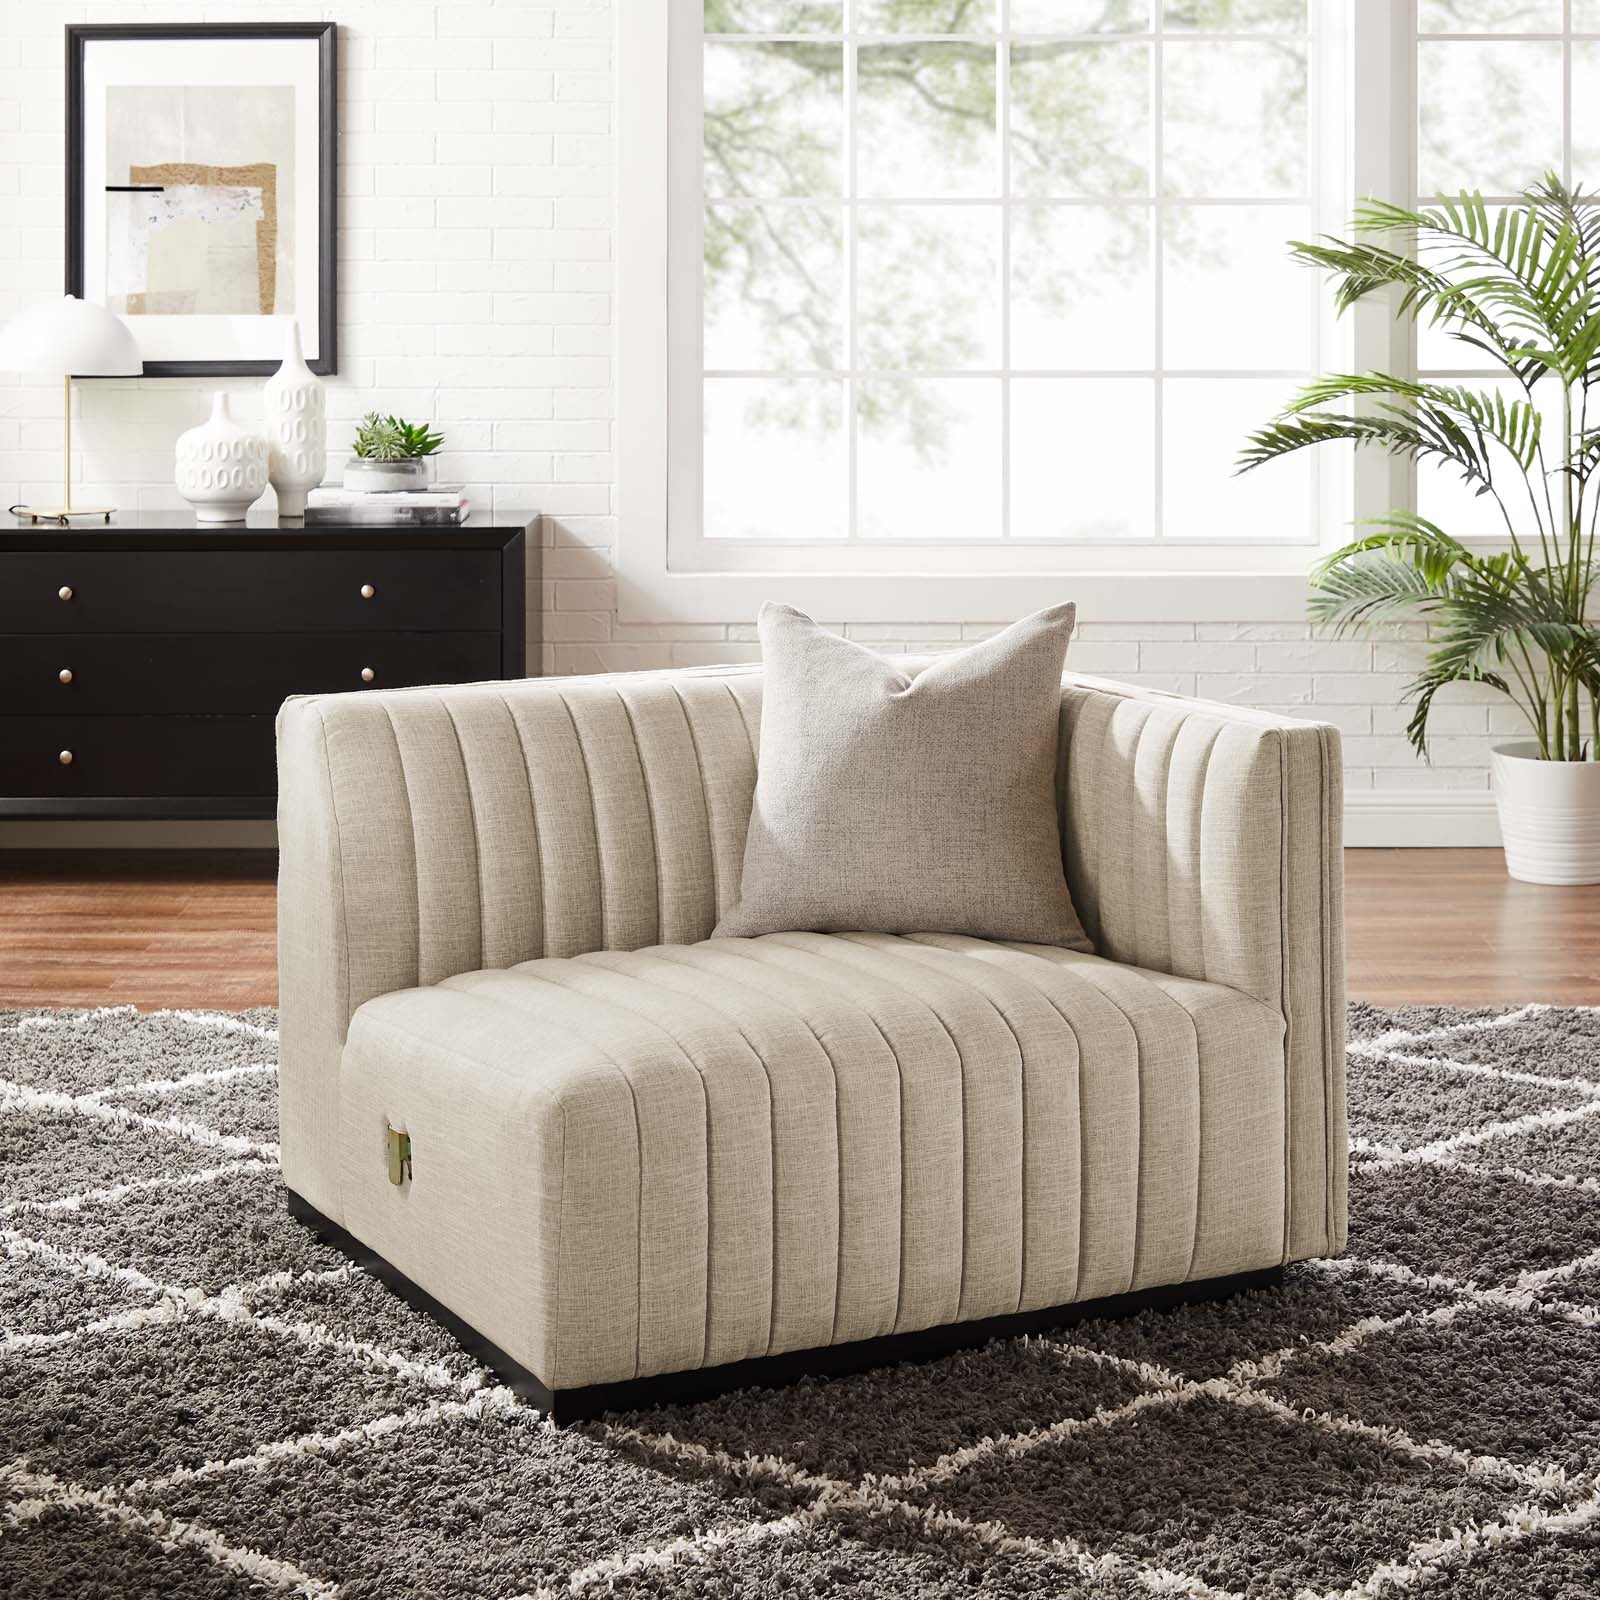 Modway Accent Chairs - Conjure Channel Tufted Upholstered Fabric Right-Arm Chair BlackBeige